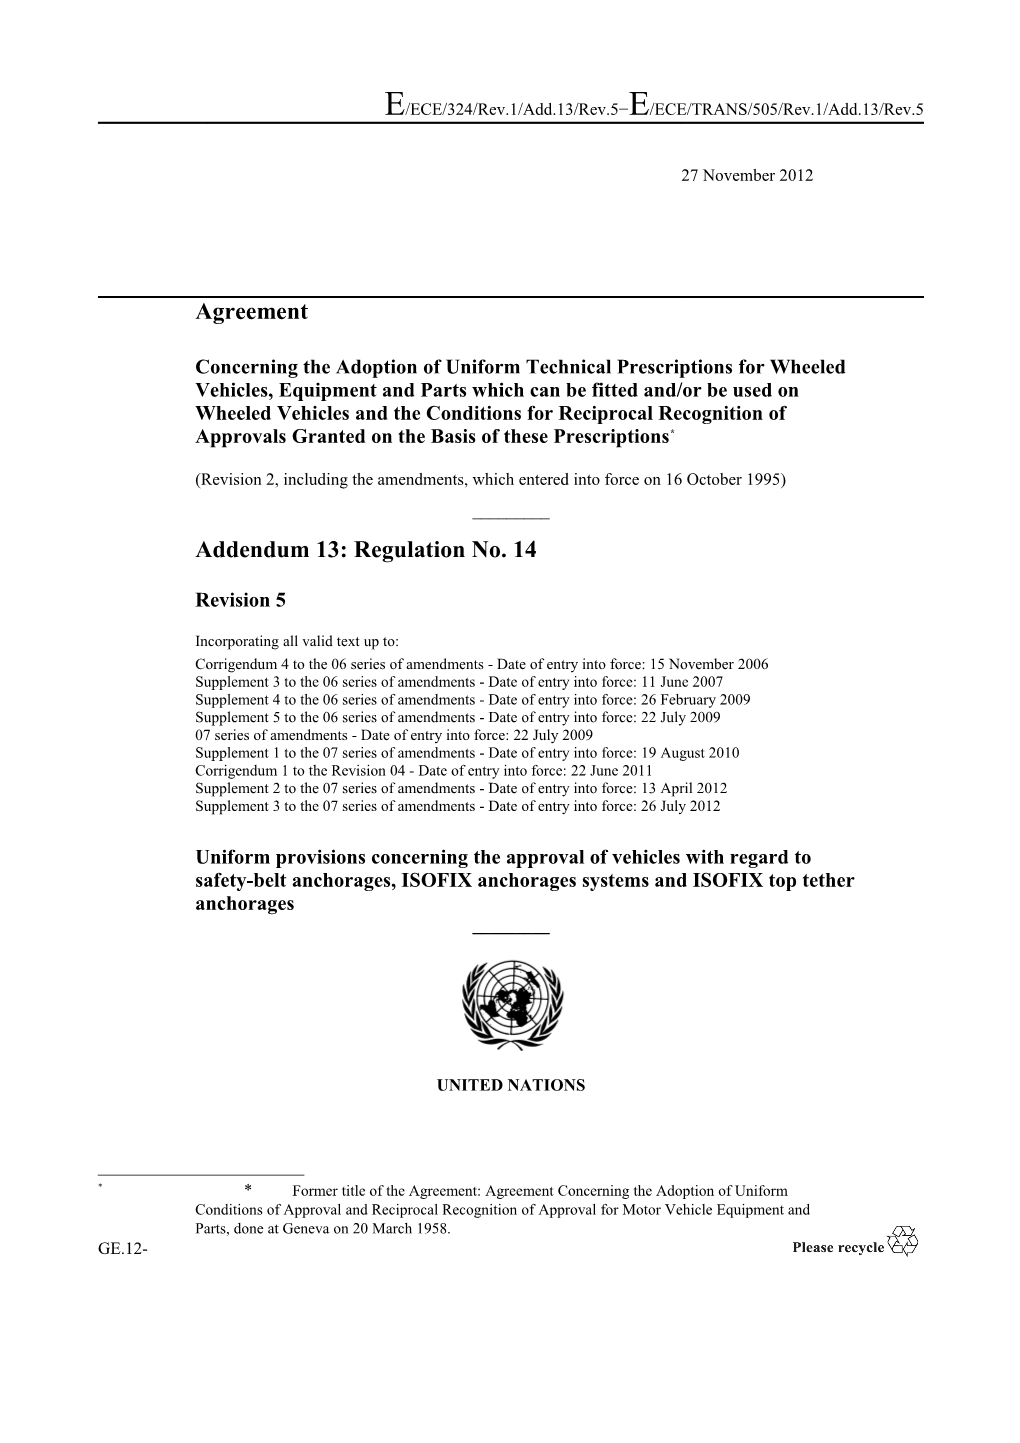 Revision 2, Including the Amendments, Which Entered Into Force on 16 October 1995